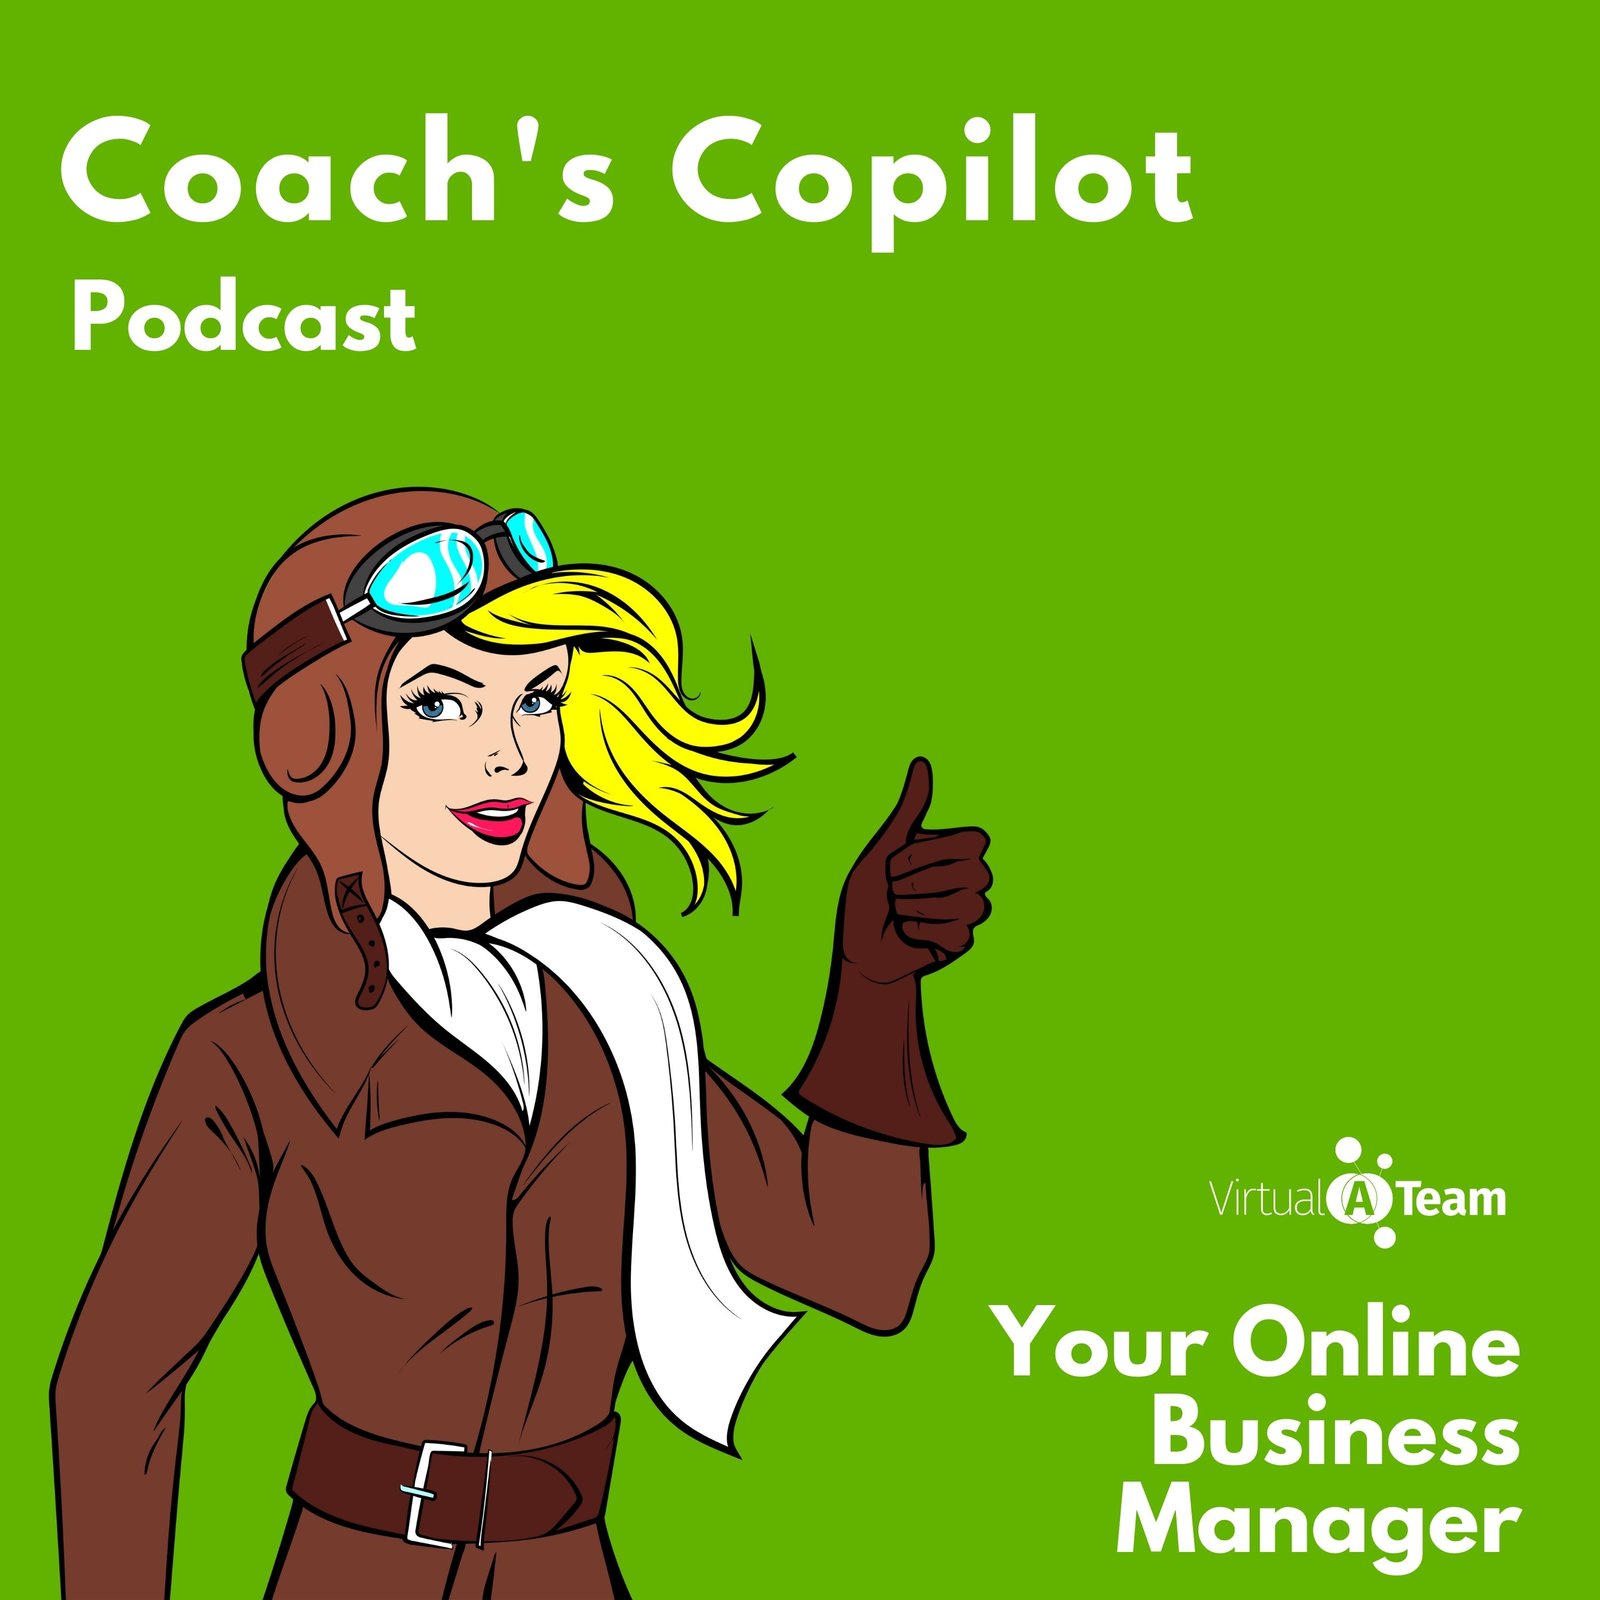 Coach's Copilot: Your Online Business Manager Podcast